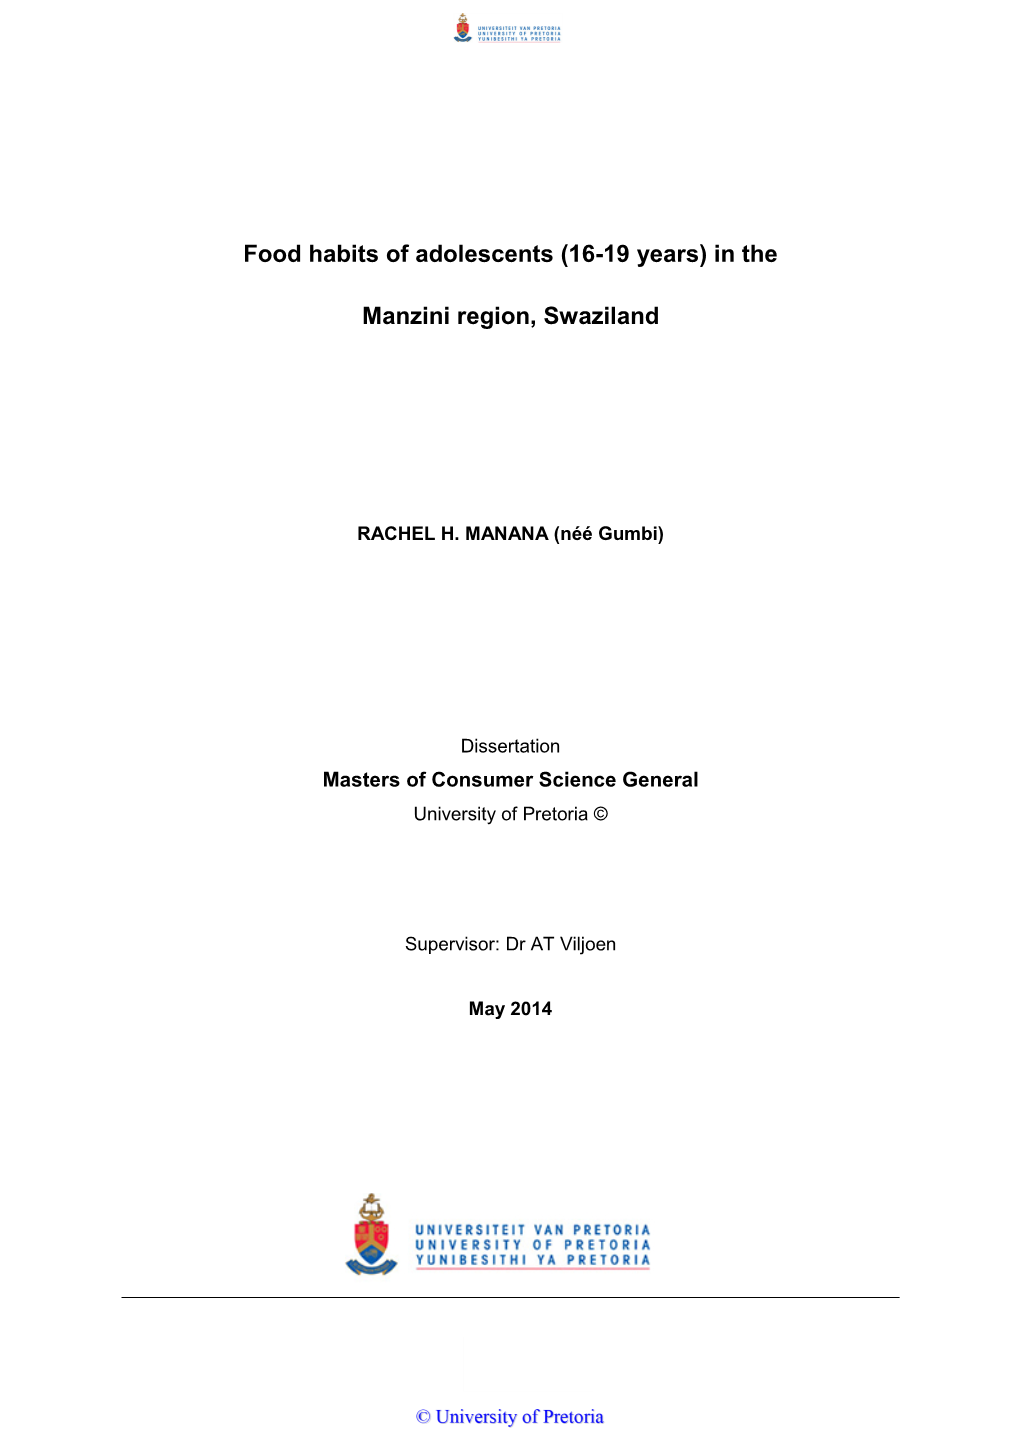 Food Habits of Adolescents (16-19 Years) in The